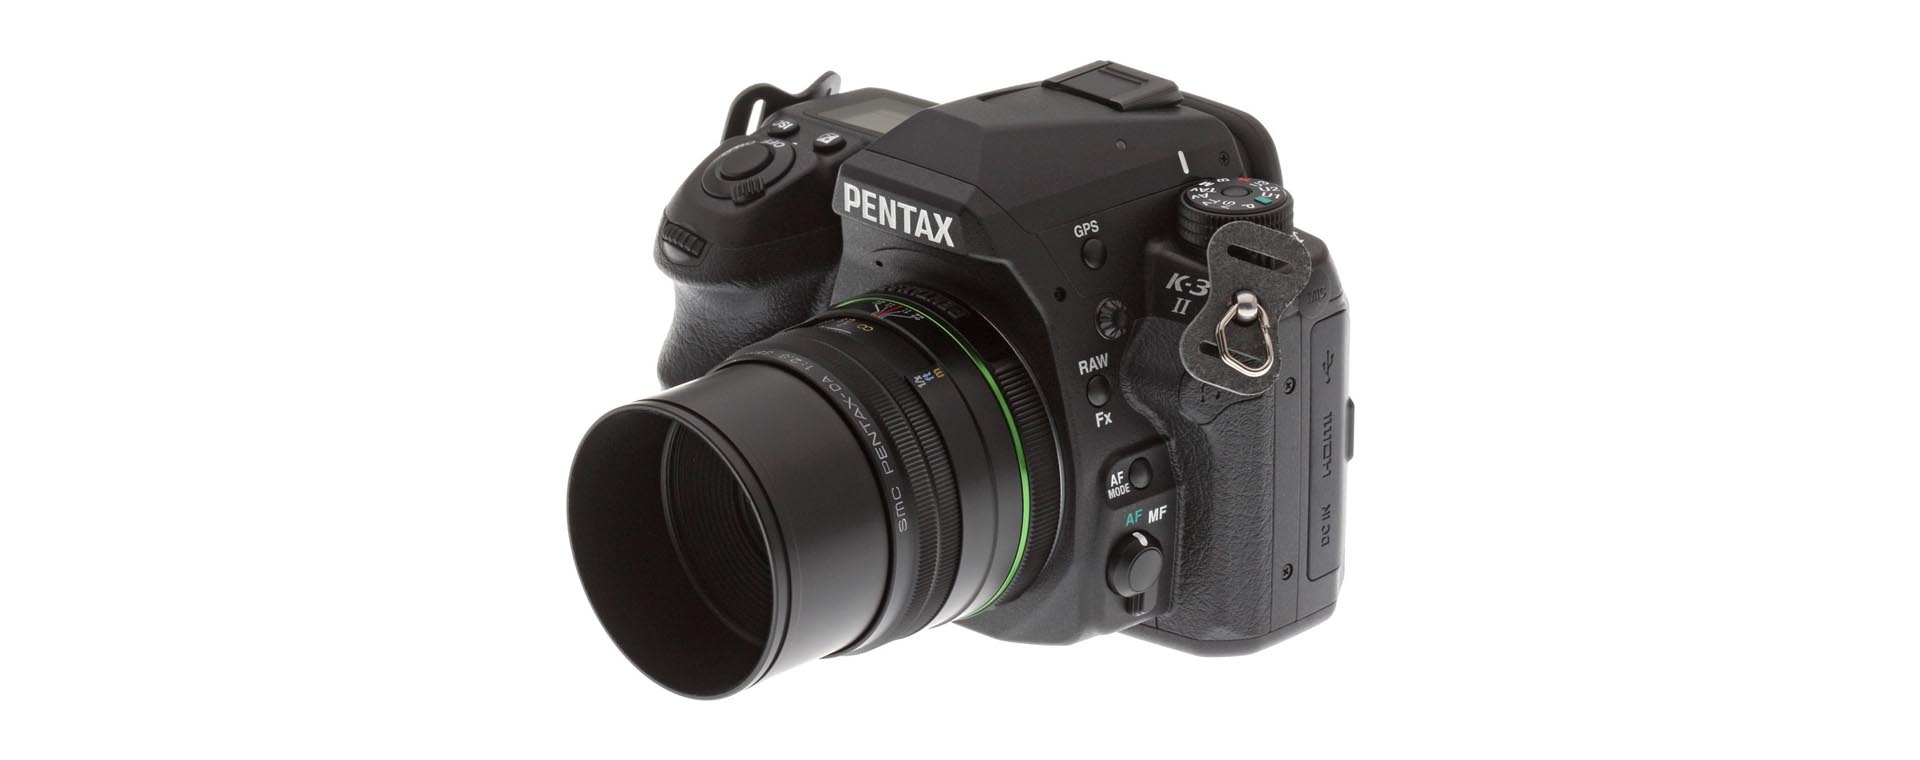 visual garbage Have a bath Reviewing the Pentax K-3 II: A Fine DSLR Camera for a budget price